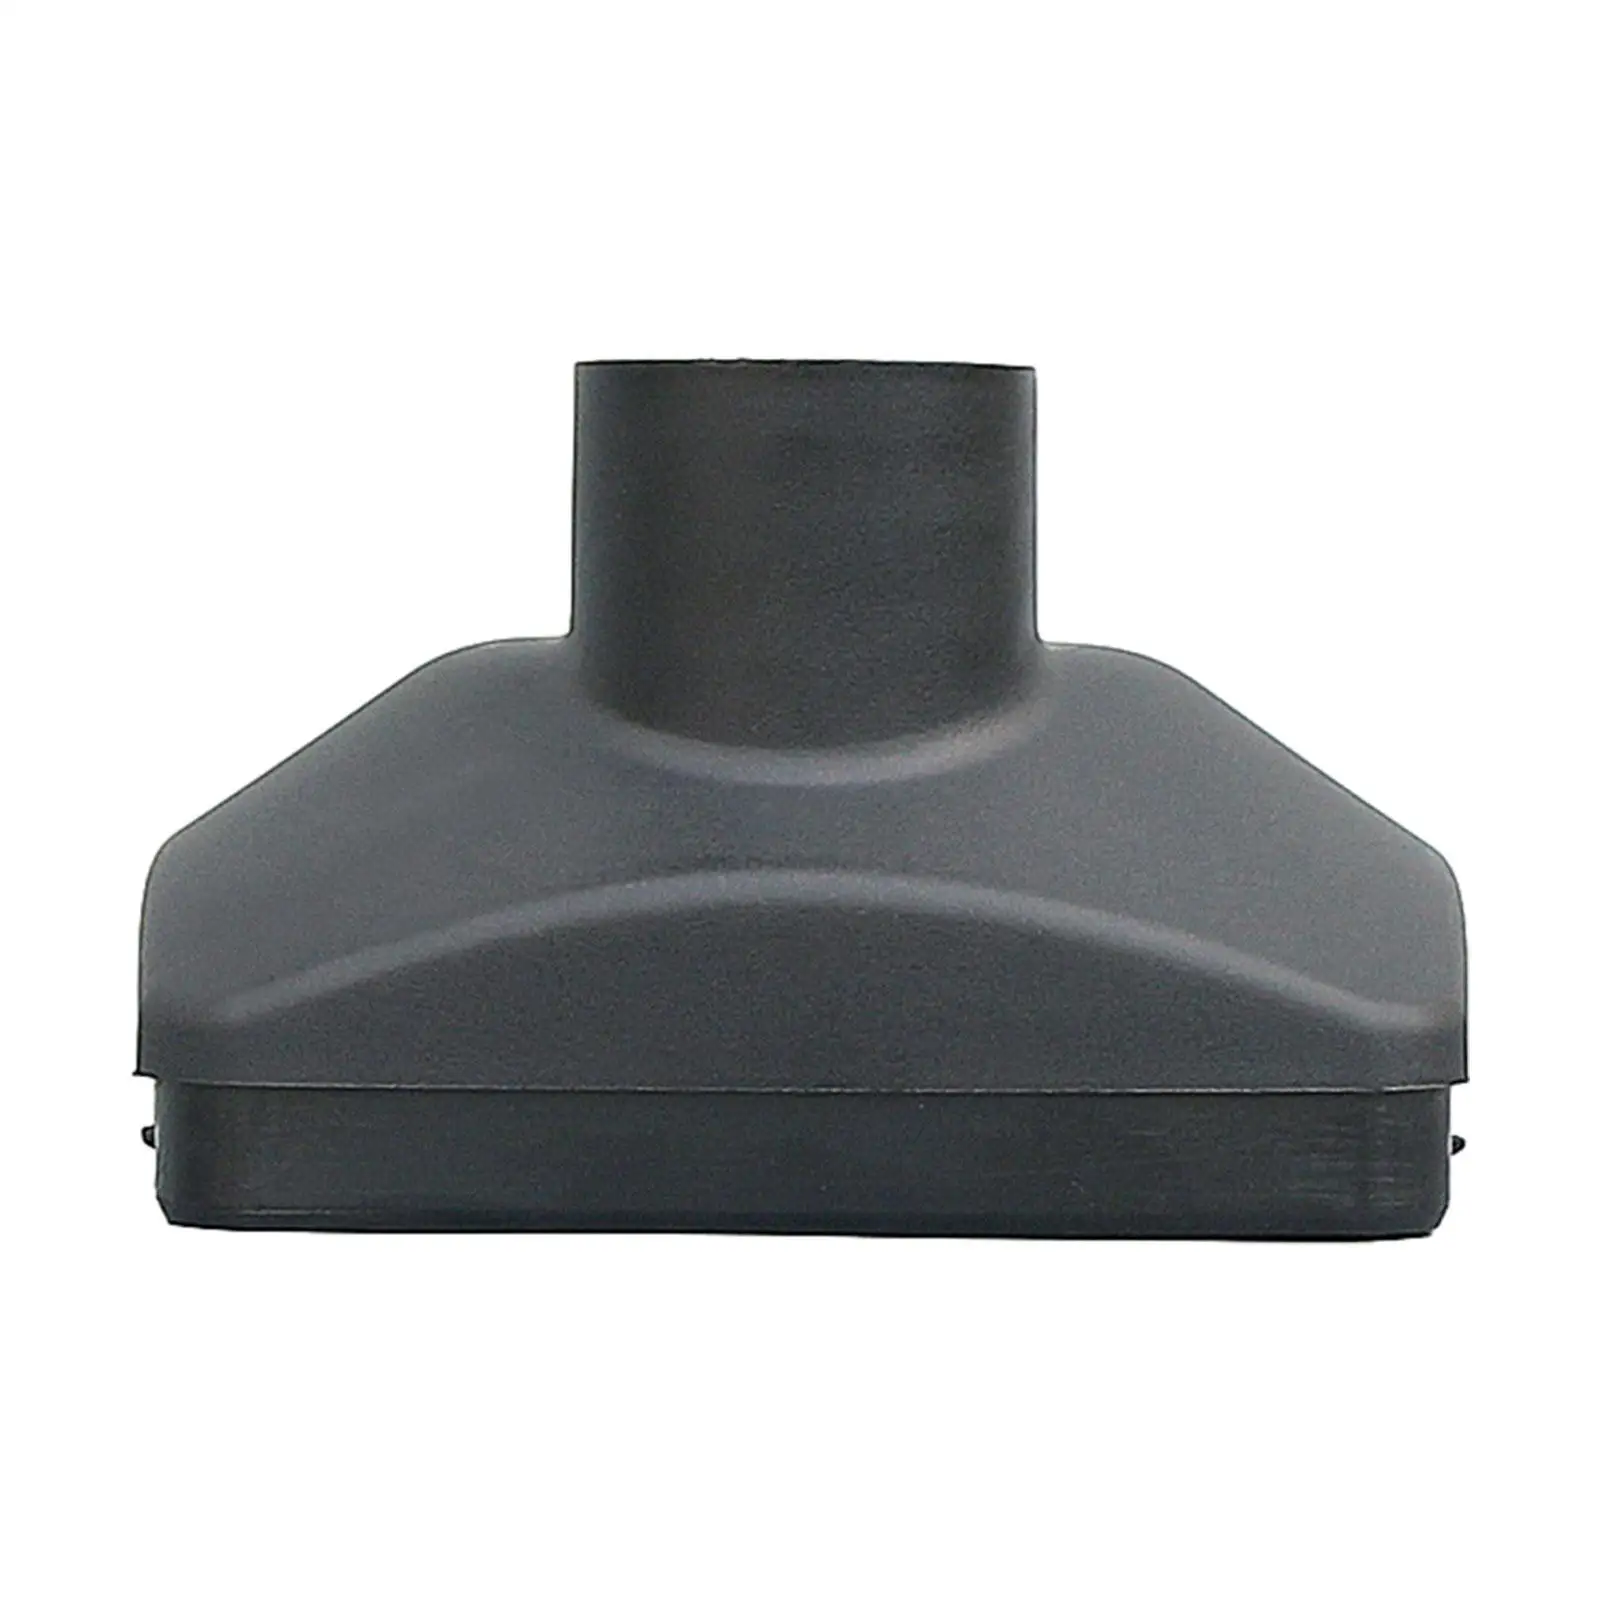 Car Air Parking Heater Durable 50mm Outlet Cover for Truck Bus